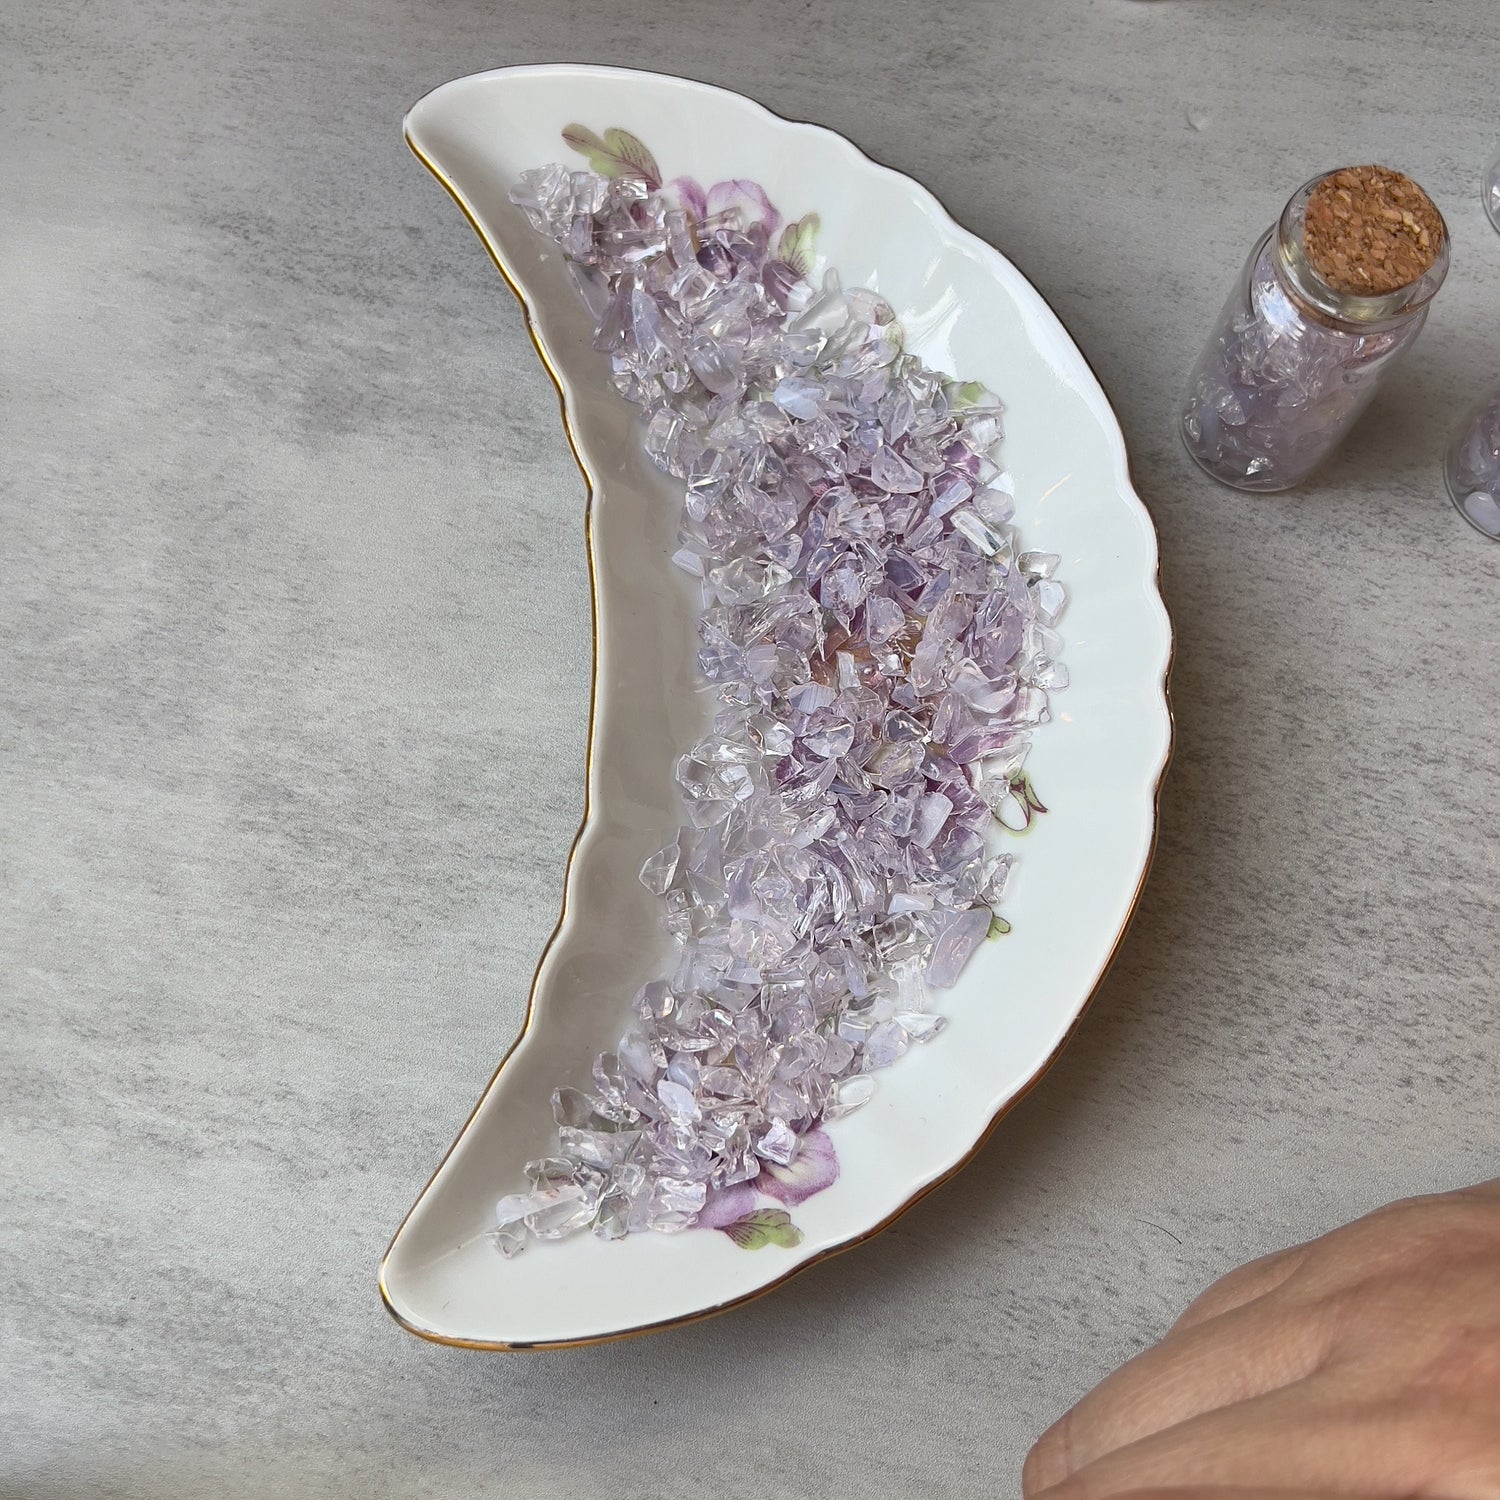 Rare Lavender Moon Quartz Chips in a Wish Bottle | Lavender Moon Quartz from Brazil | Rare Crystals and Minerals | Crystal Grid Supply